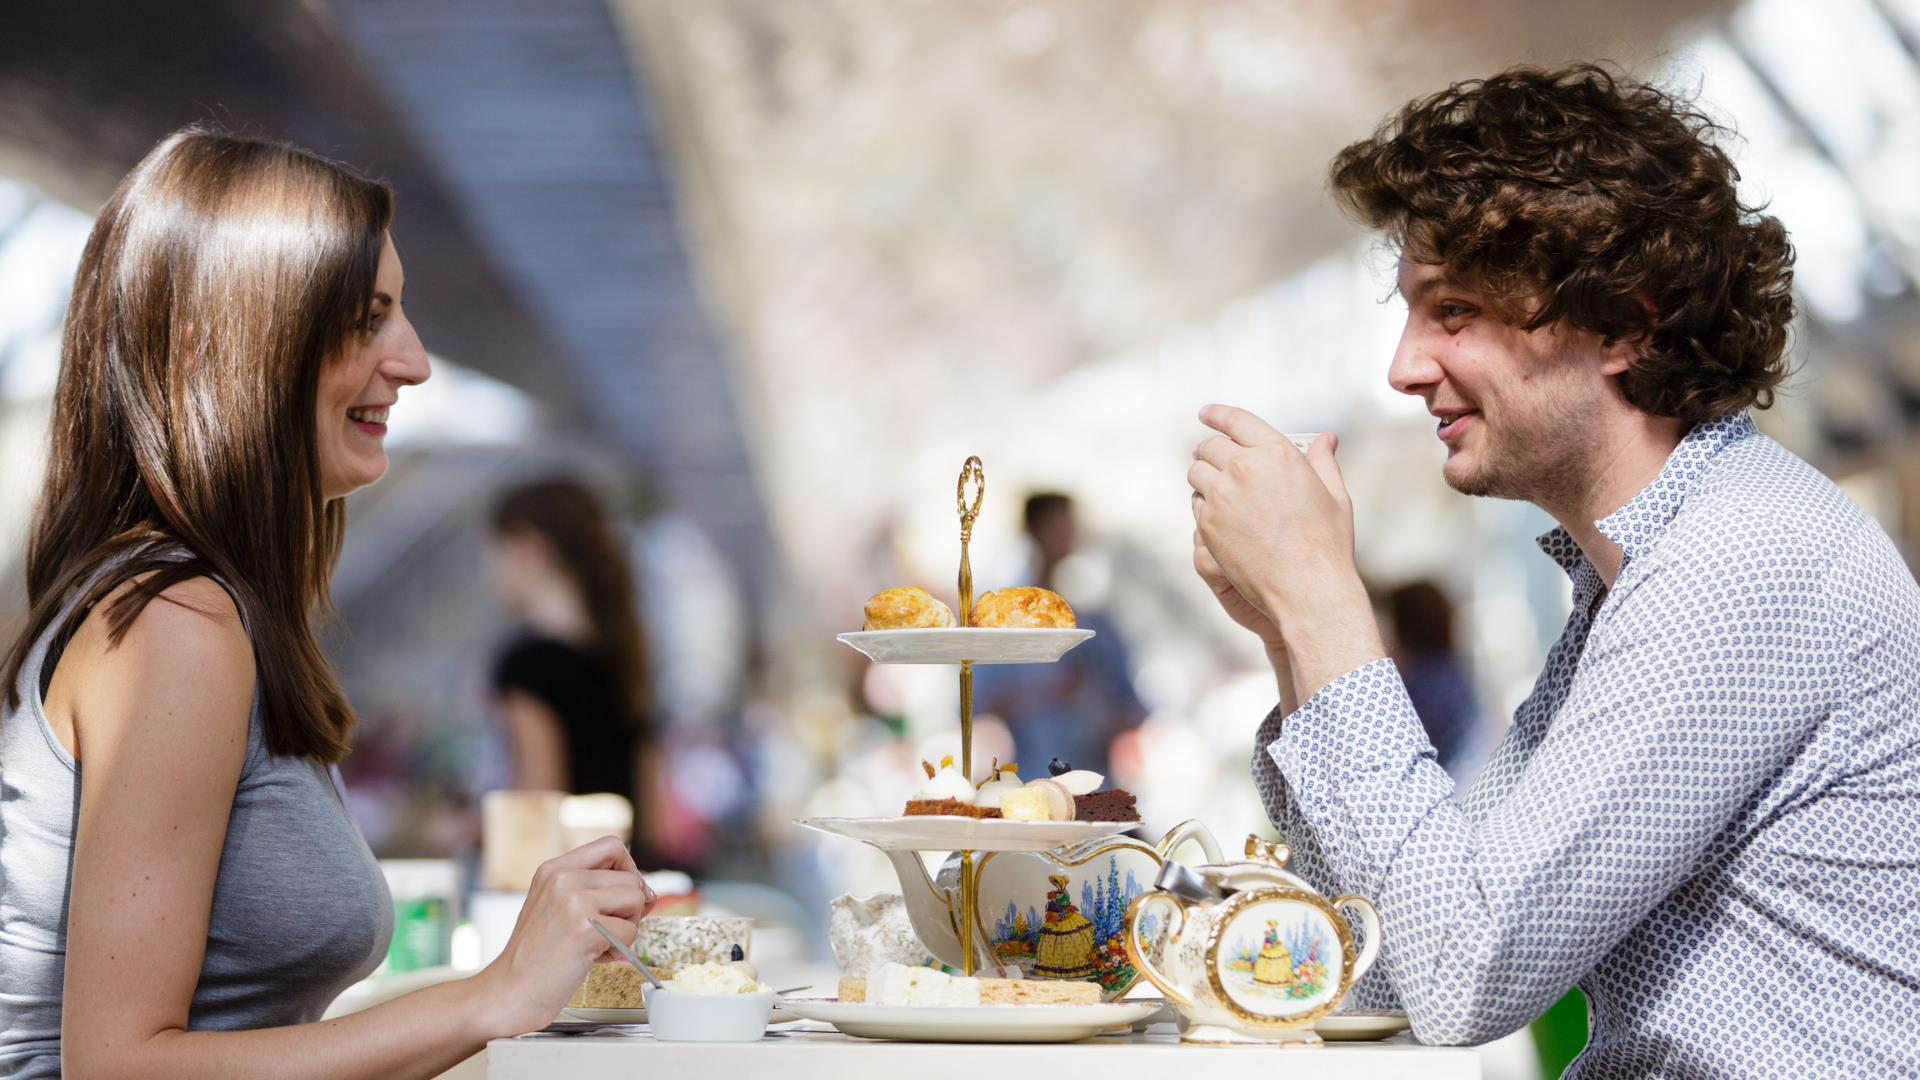 A couple have afternoon tea underneath the hull of Cutty Sark in Greenwich.